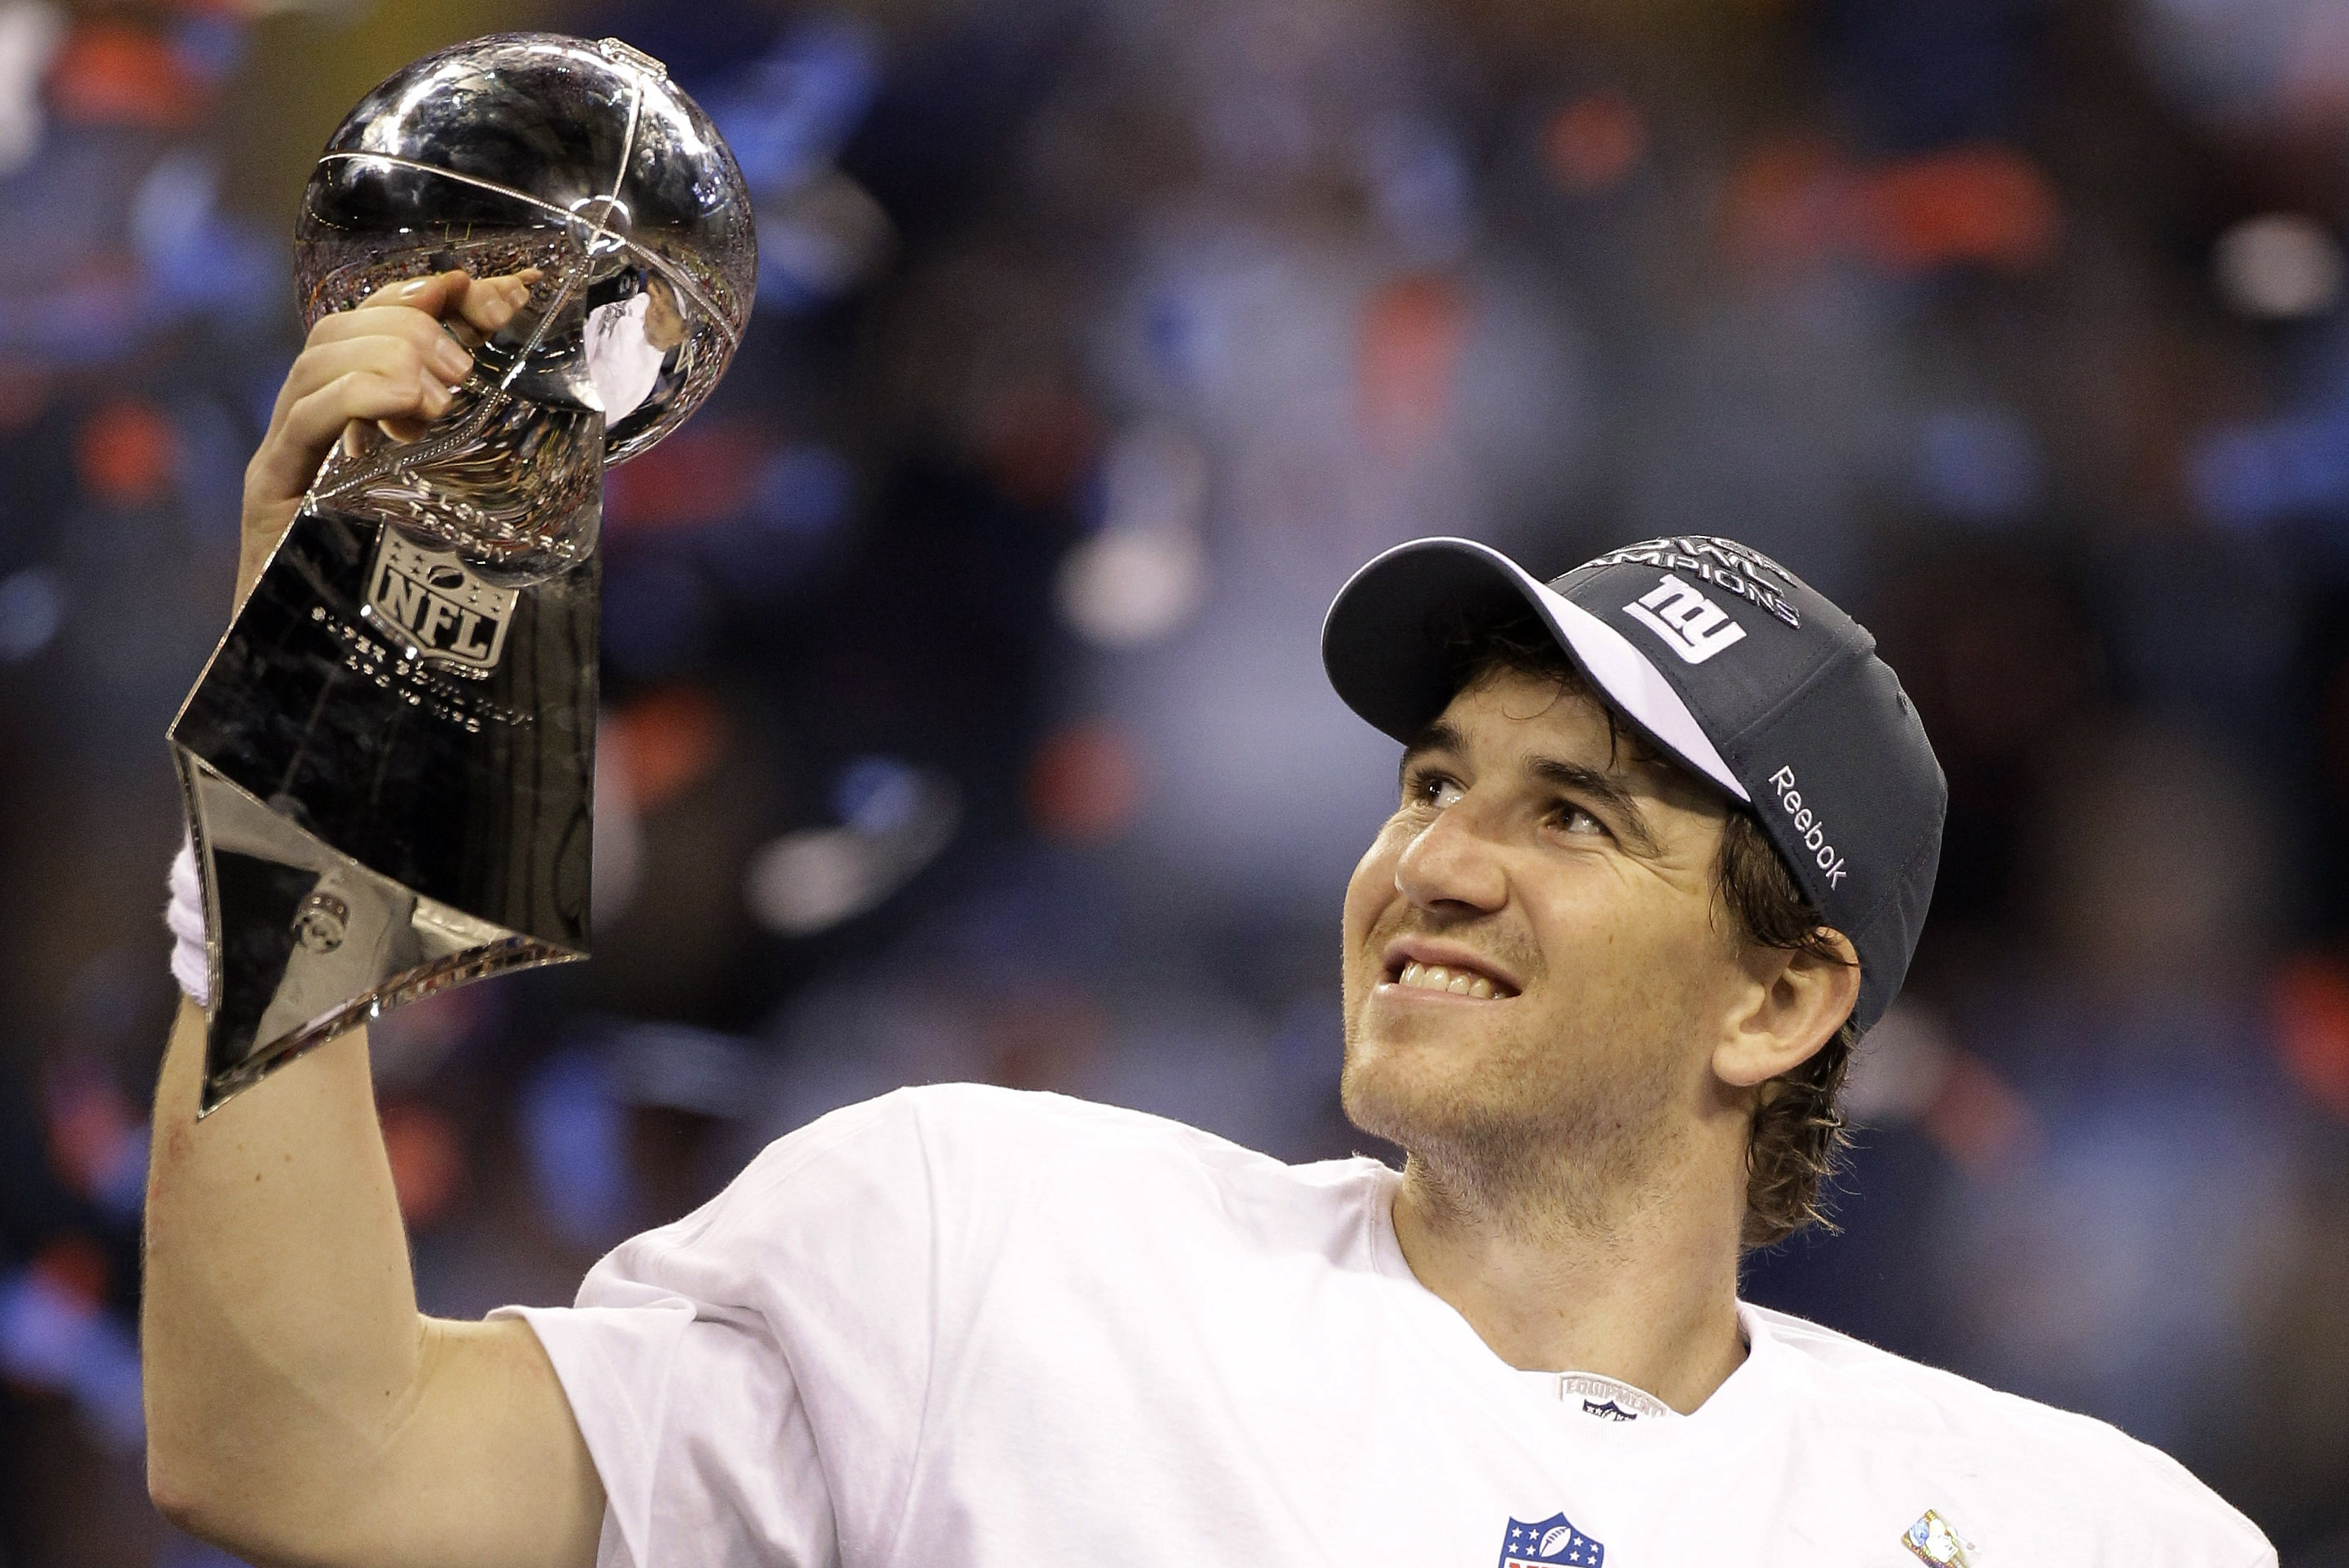 Eli Manning's defining Giants moment was built from his lowest